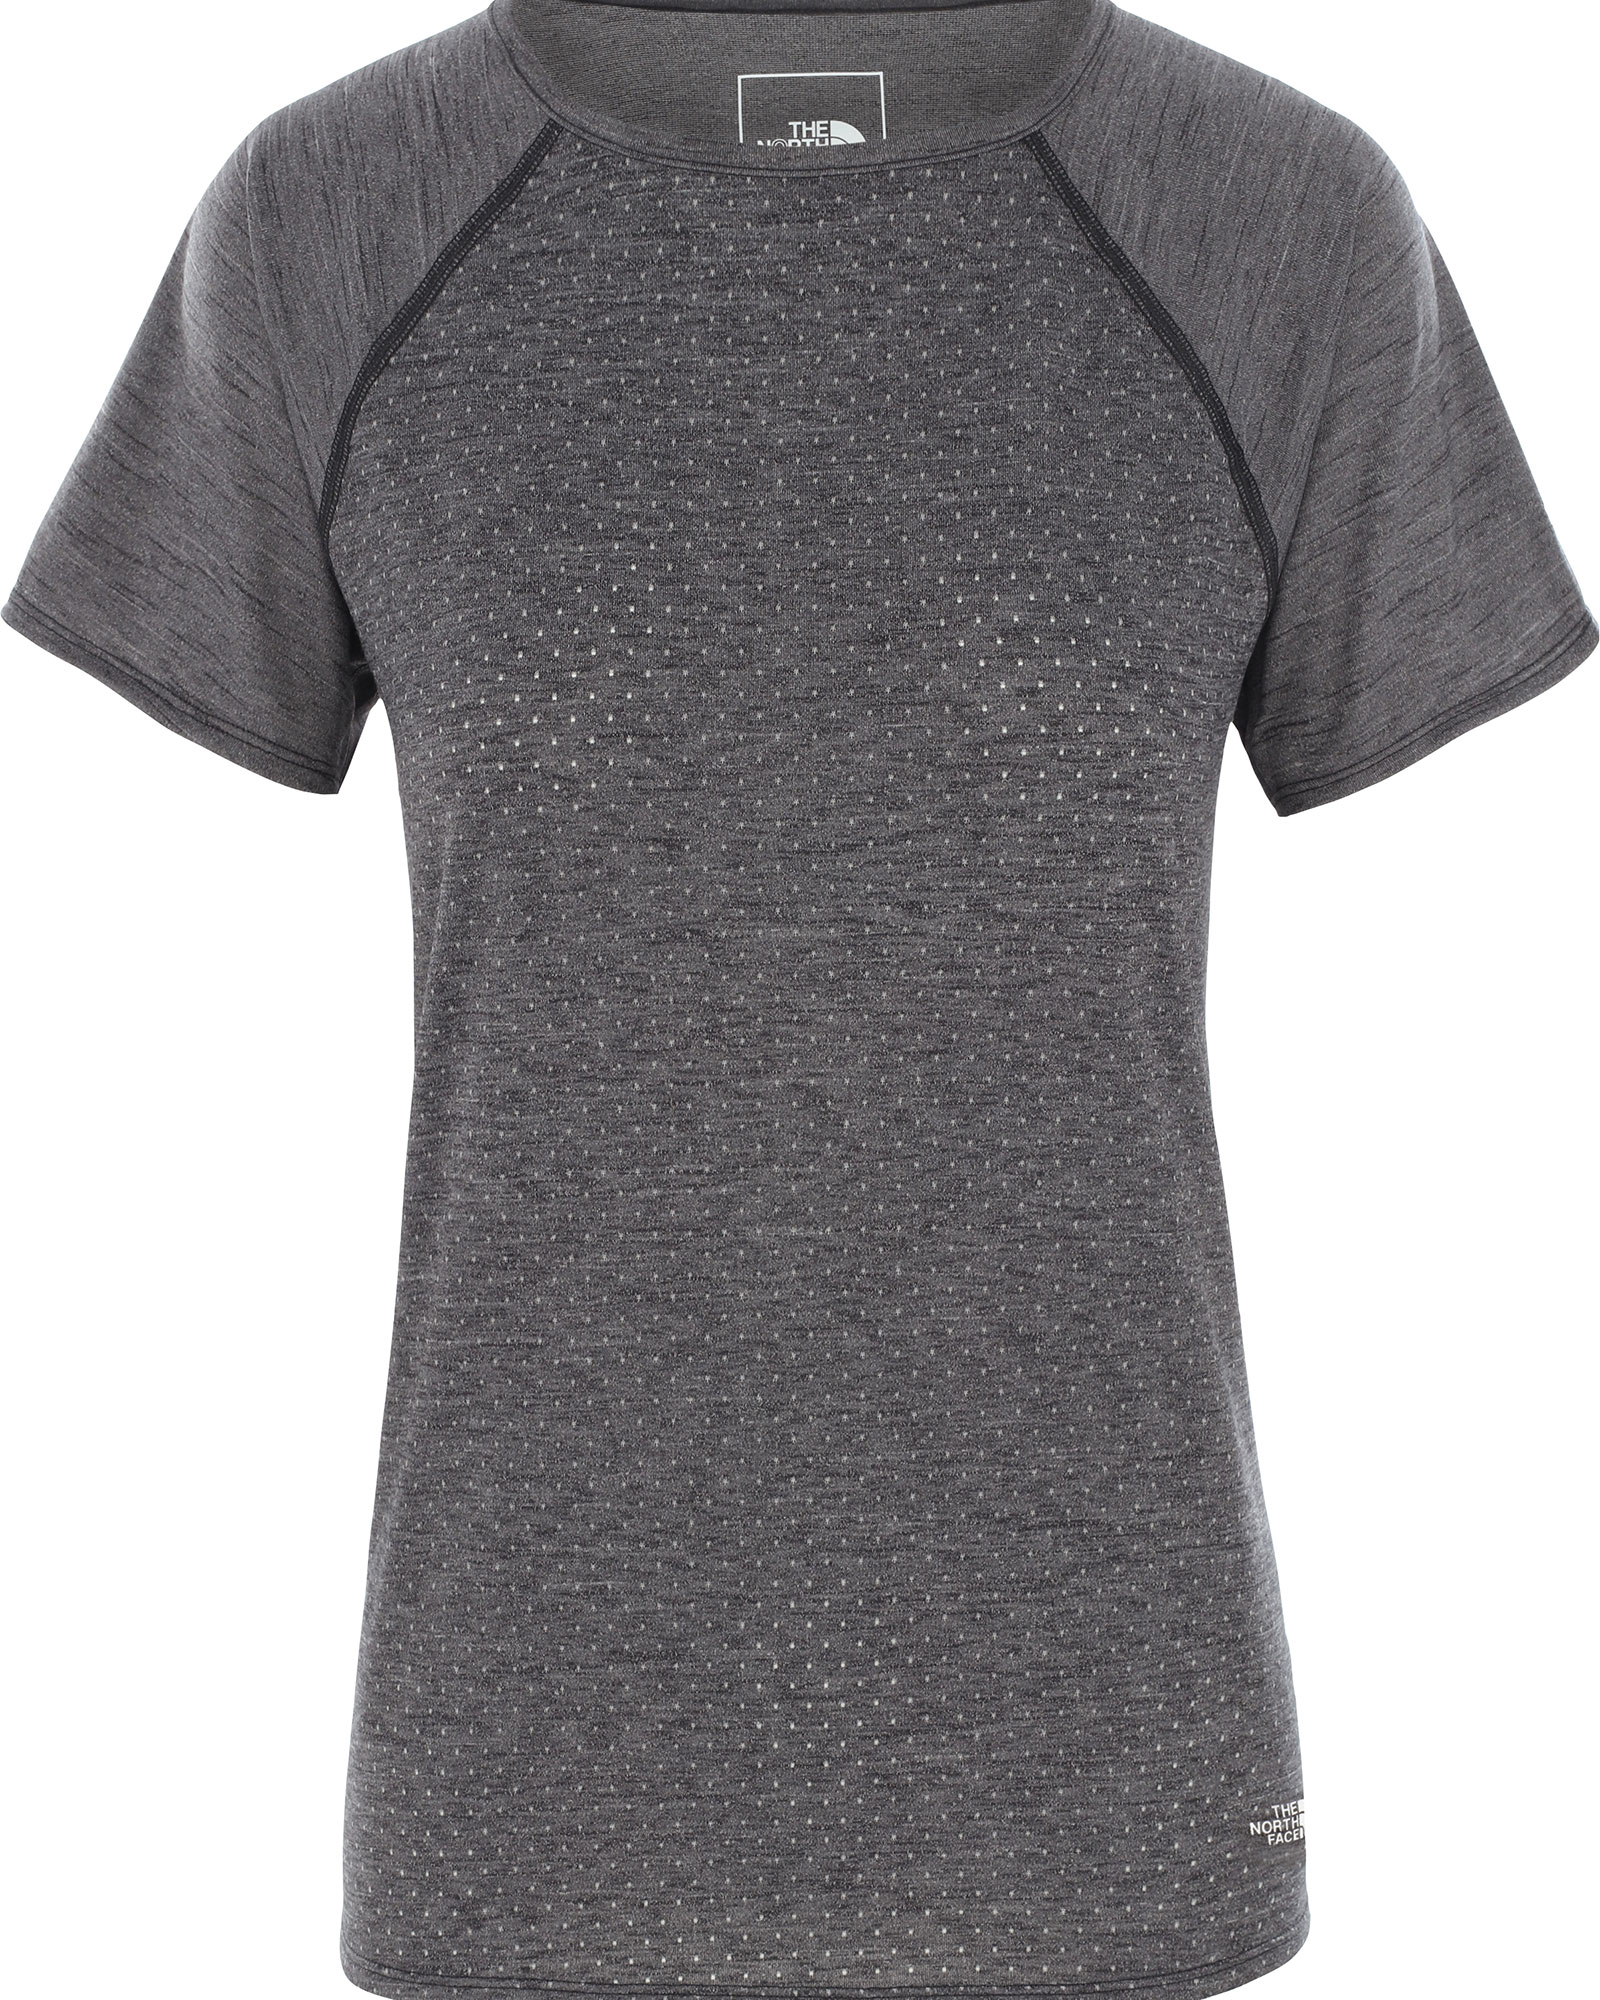 The North Face Active Trail Jacquard Women’s T Shirt - TNF Dark Grey Heather M